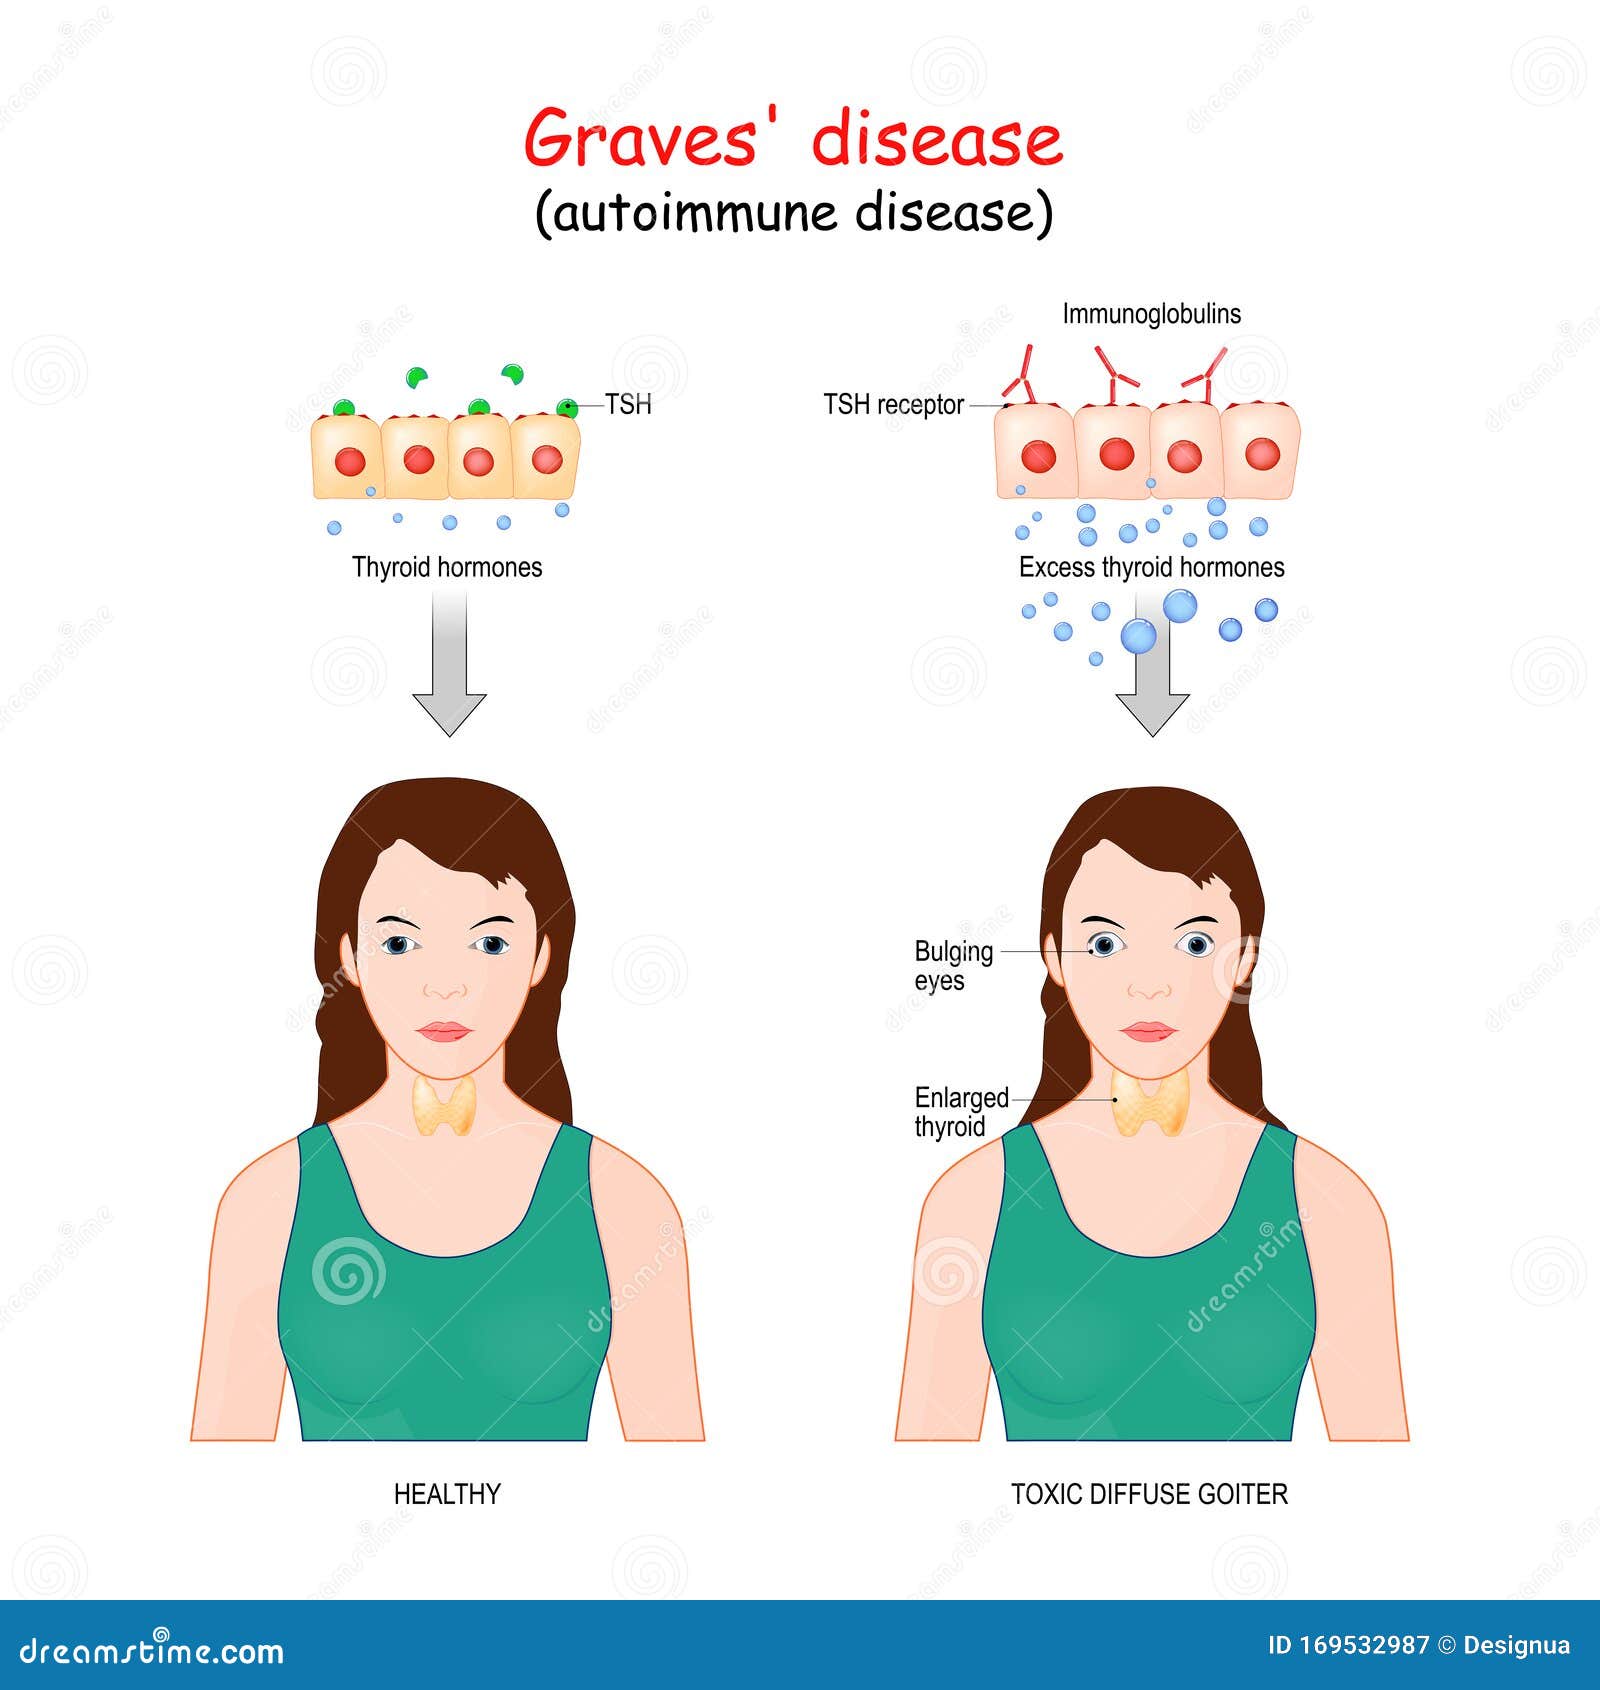 graves` disease. toxic diffuse goiter is an autoimmune disease that affects the thyroid